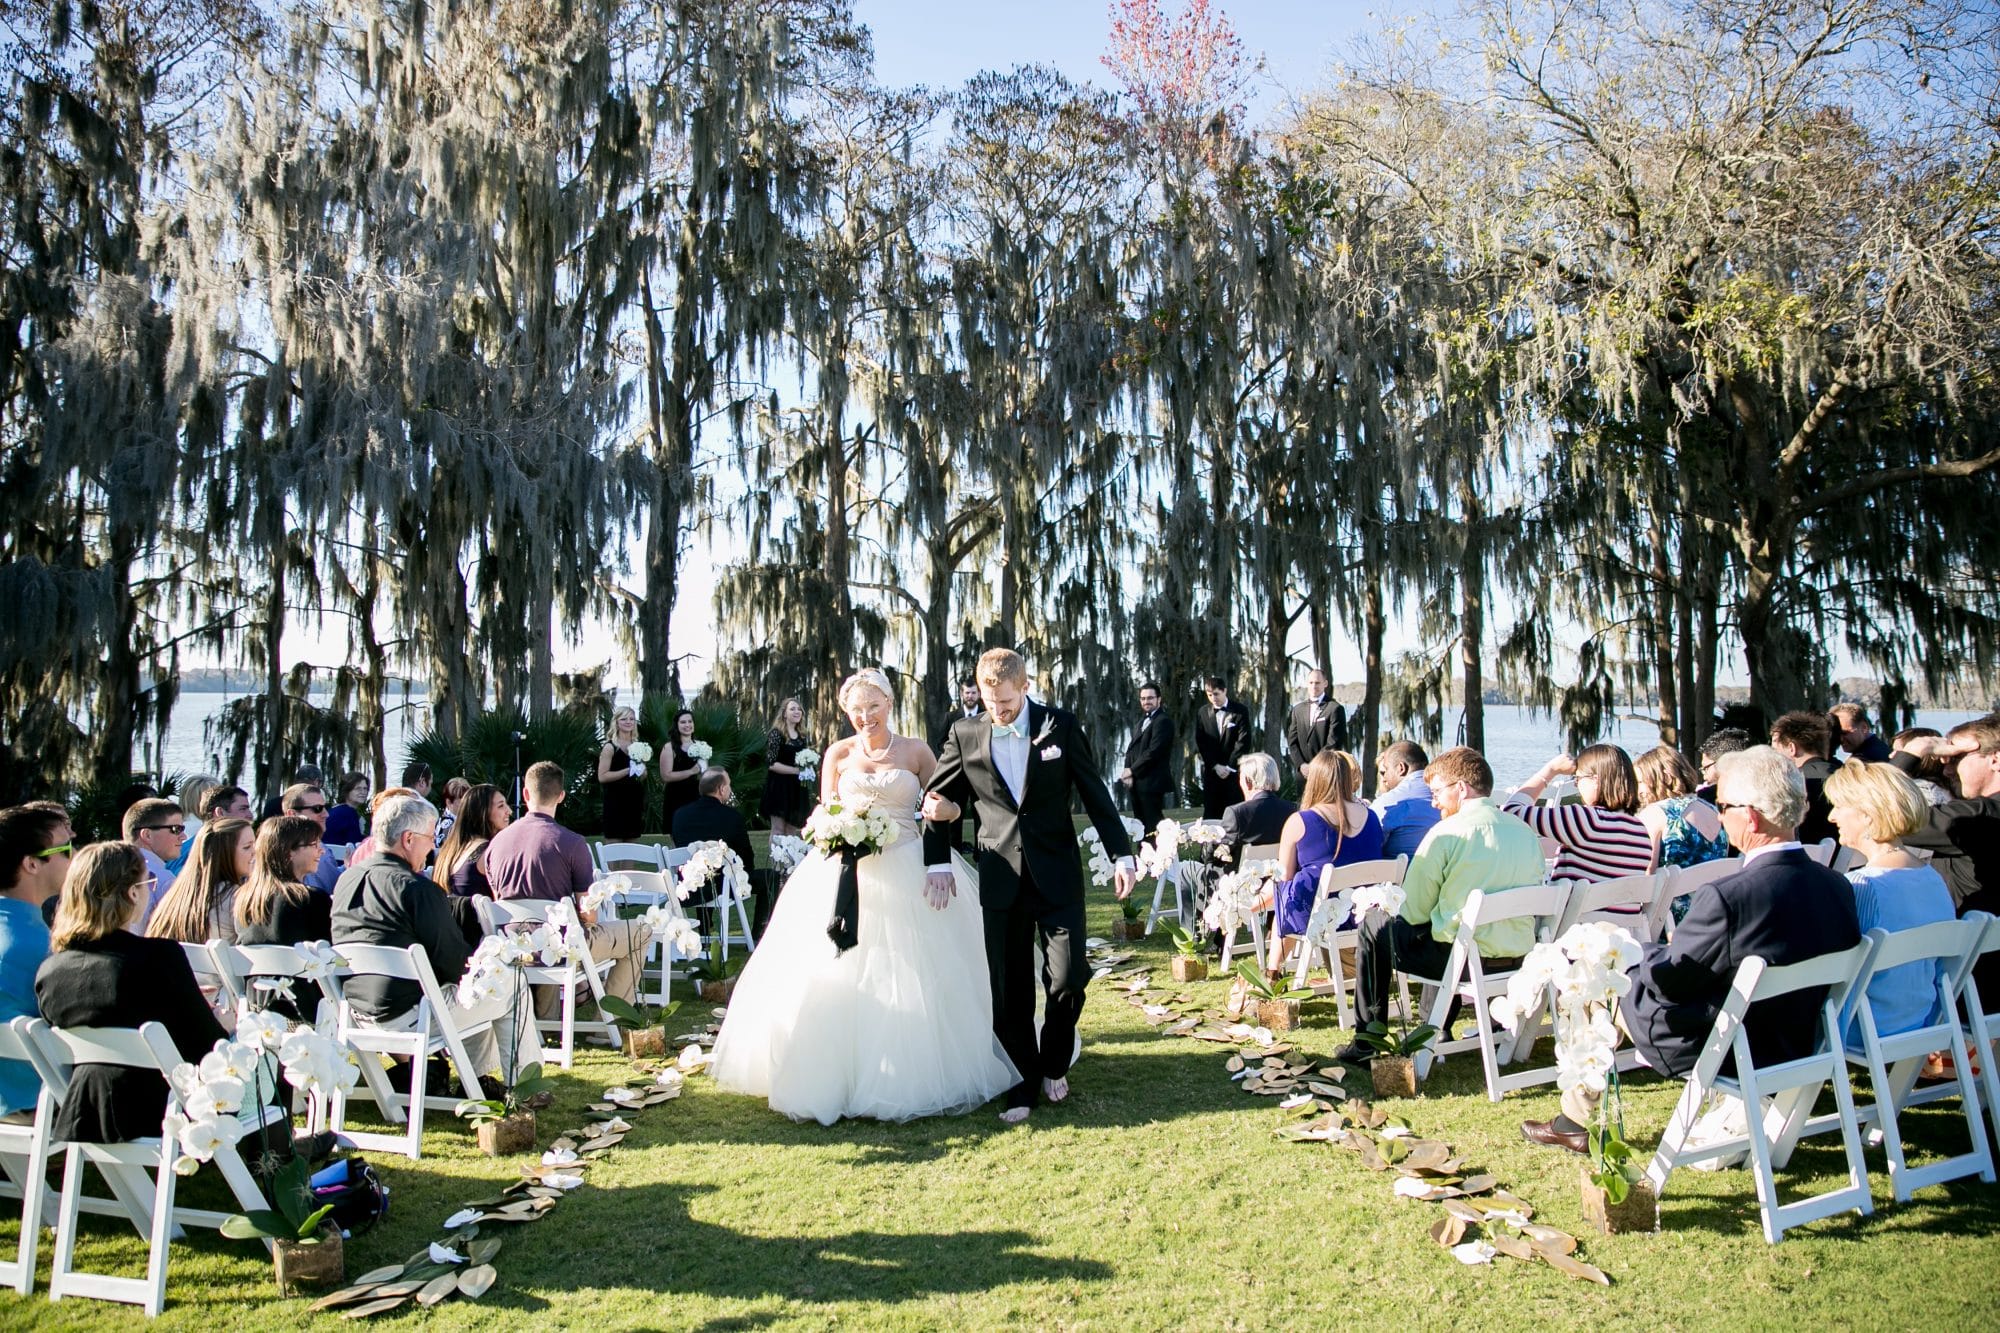 Mission Inn Resort and Club - outdoor ceremony beneath moss covered trees